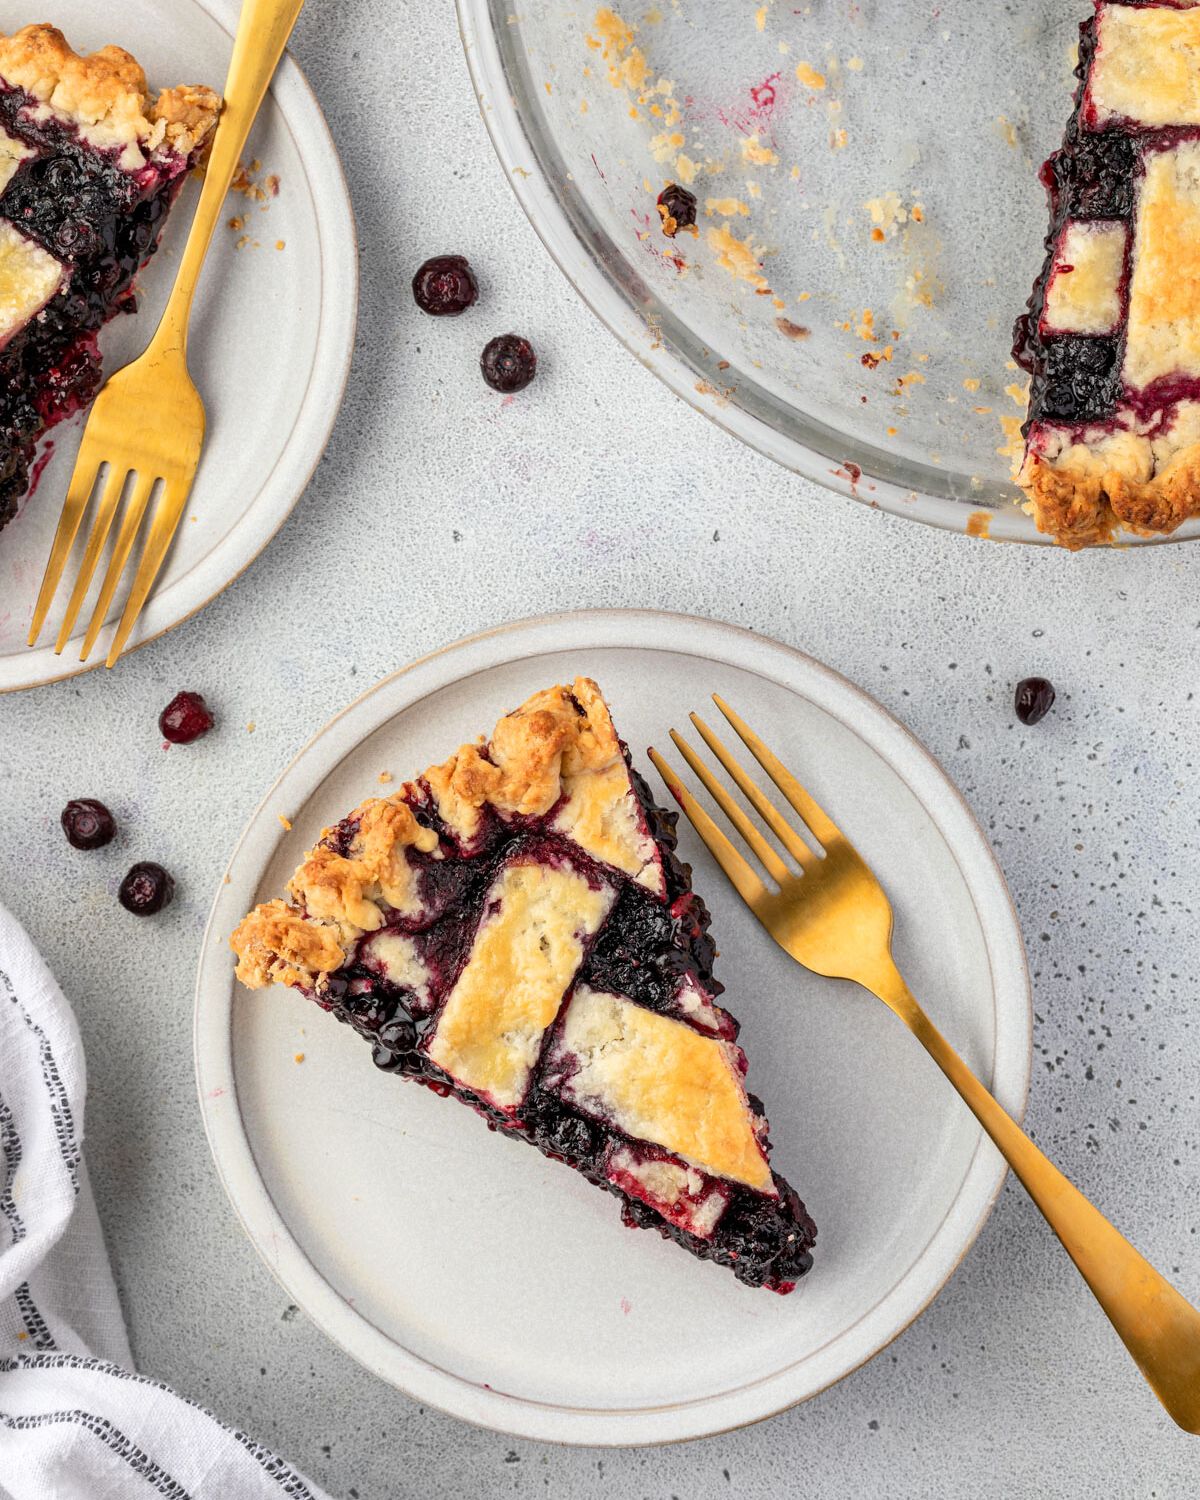 A slice of huckleberrie cake on a plate with a gold fork resting in it, another plate with pie in the corner, pie plate with some slices removed in right corner, and huckleberries sprinkled around.